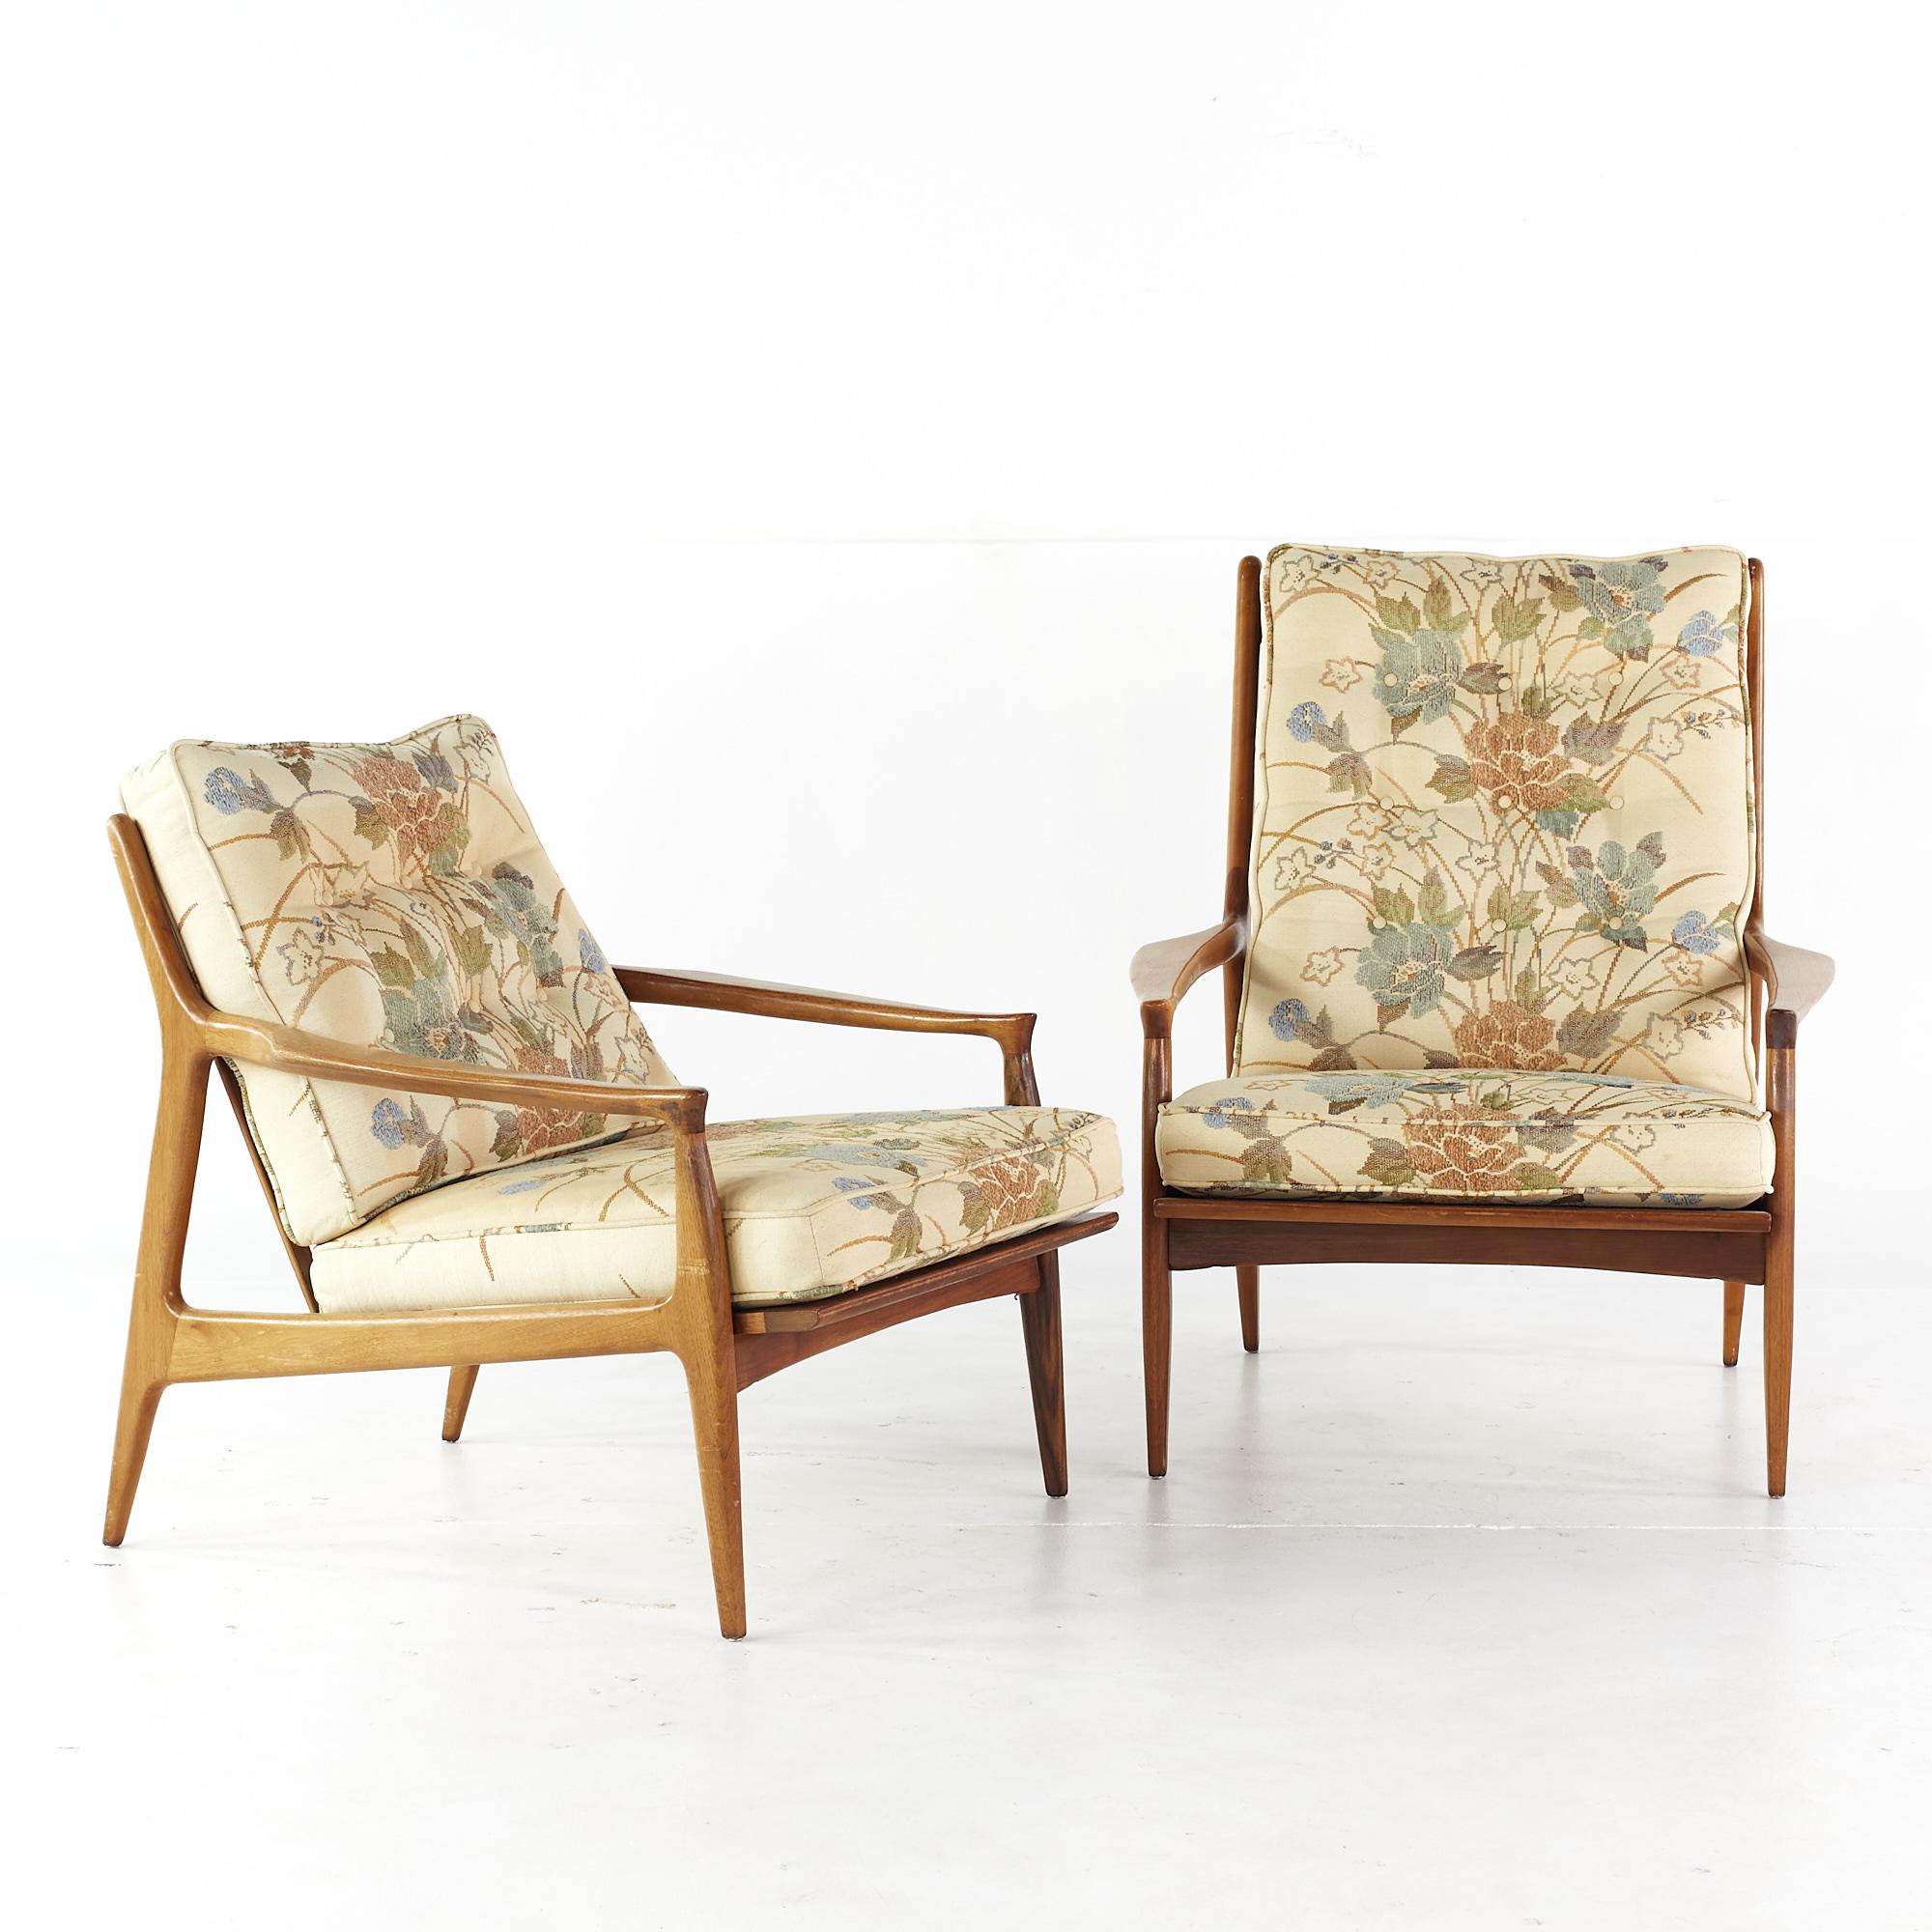 Milo Baughman for Thayer Coggin Mid Century His and Hers Archie Walnut Lounge Chairs - Pair

These chairs measure: 30 wide x 31 deep x 31 inches high with a seat height of 15.5 and an arm height/chair clearance of 19.5 inches

All pieces of